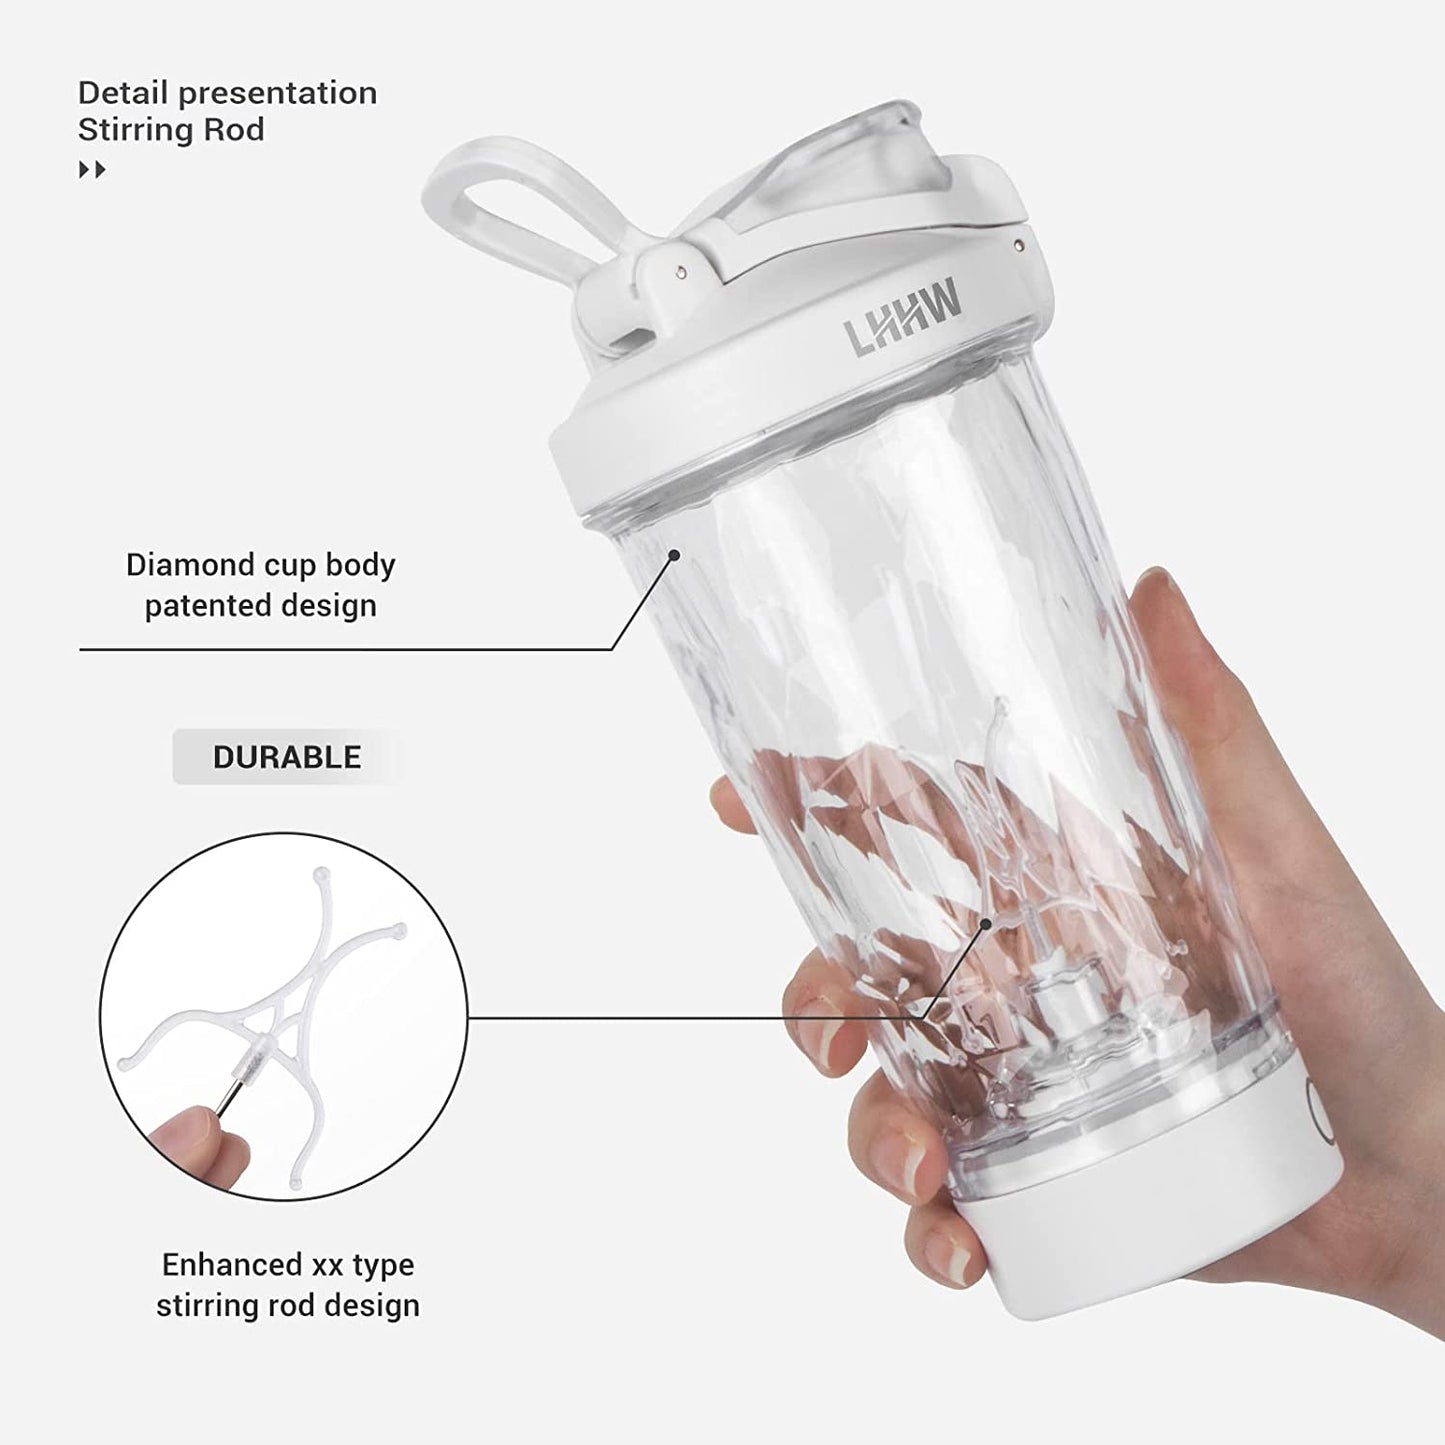 Electric Protein Shaker Bottle, 24Oz Rechargeable BPA Free Blender Cup for Protein Mixes, Portable Shaker Bottles for Gym Home Office (White)